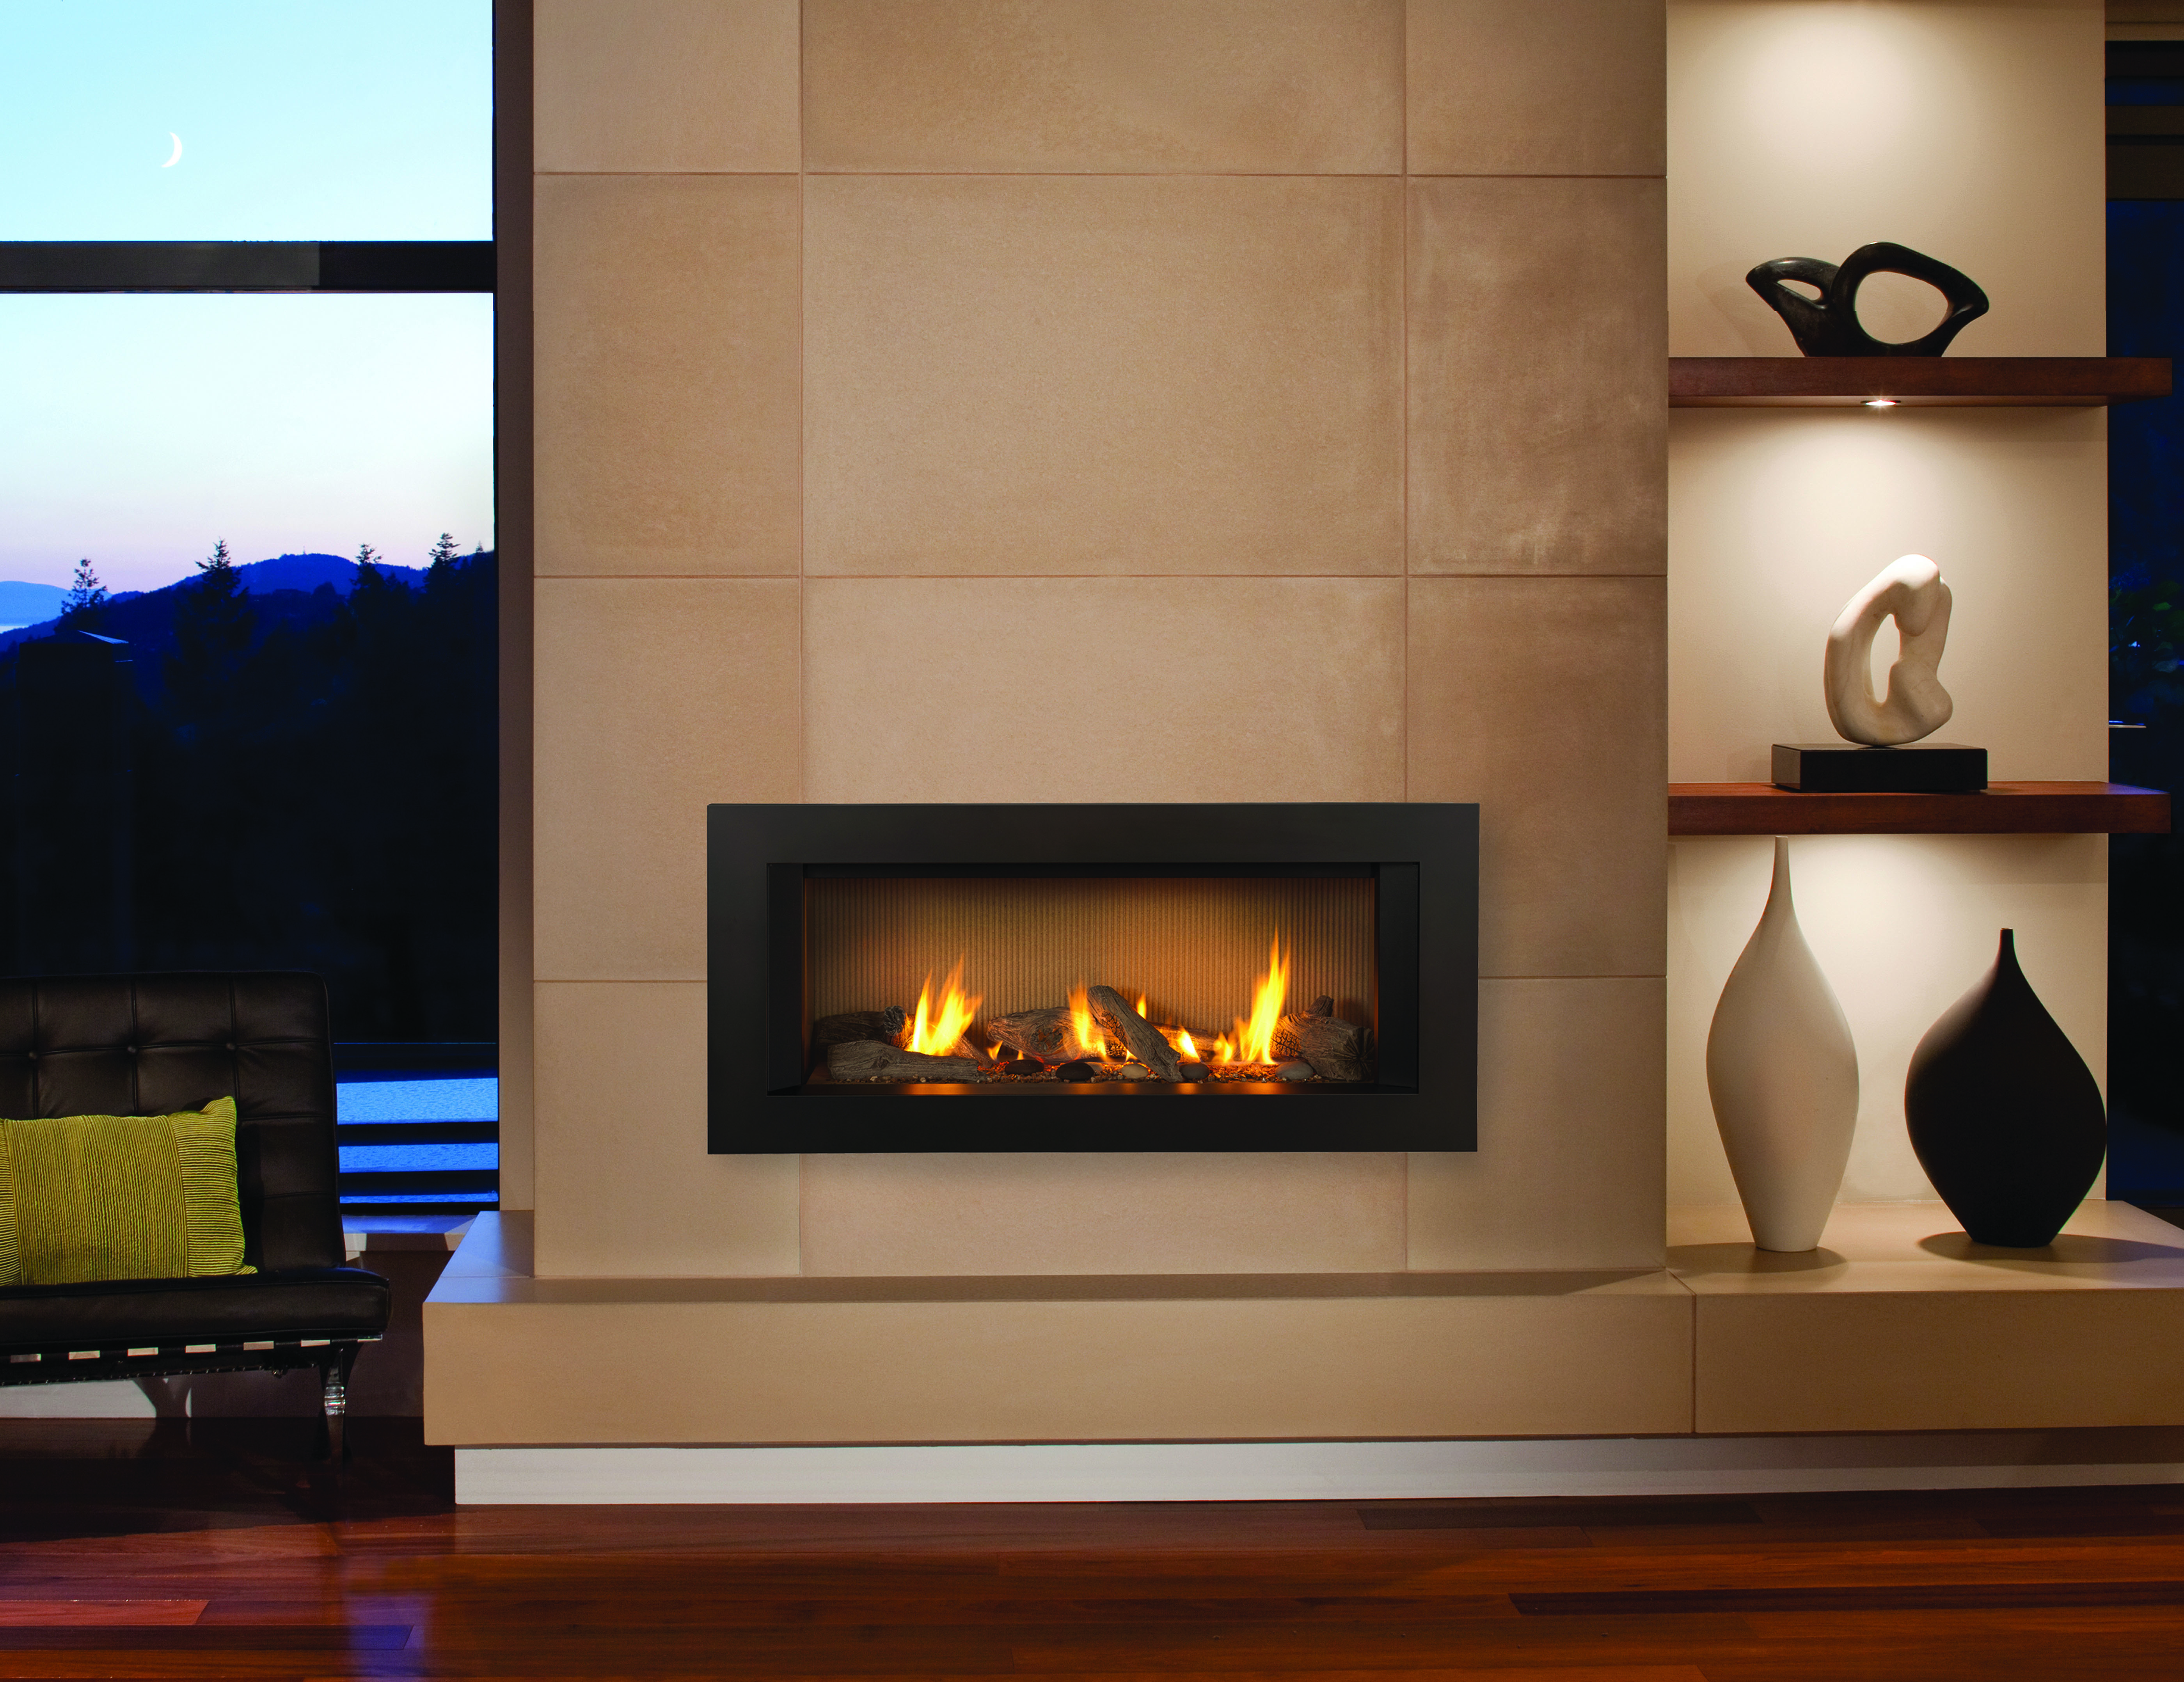 Functional and Fashionable Fireplaces | Patio & Hearth Blog